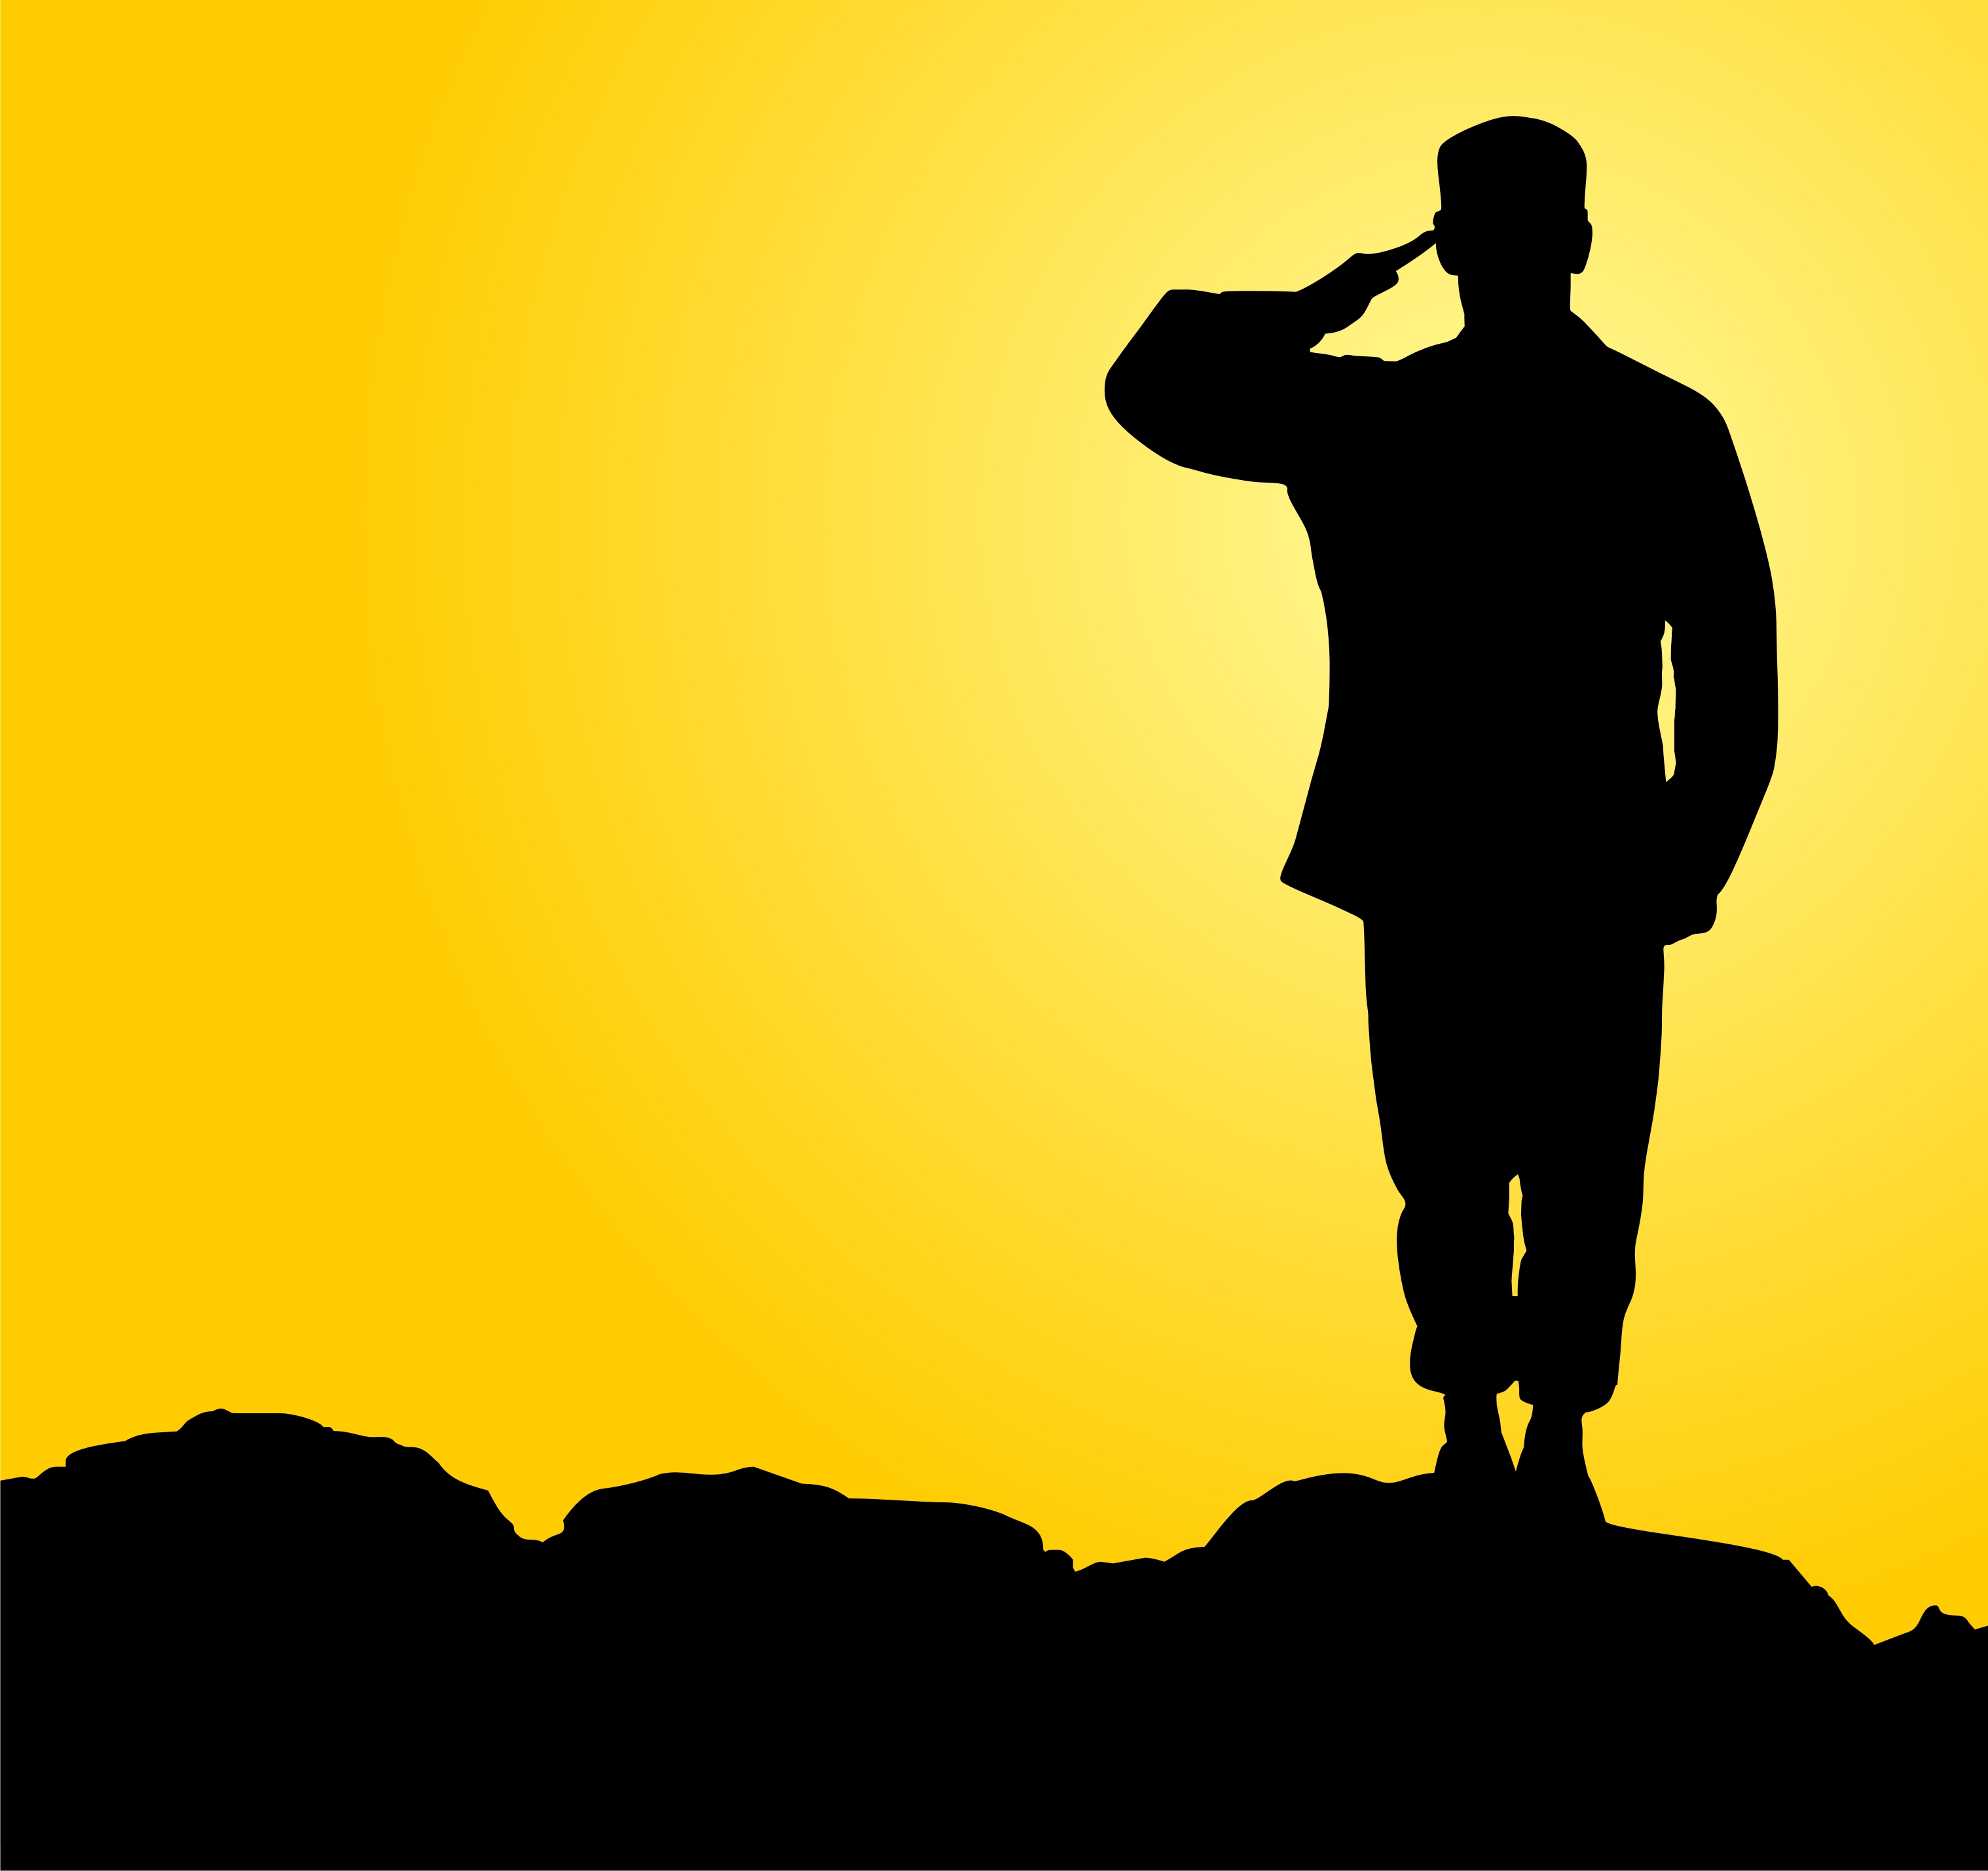 Images For > Soldier Saluting Silhouette